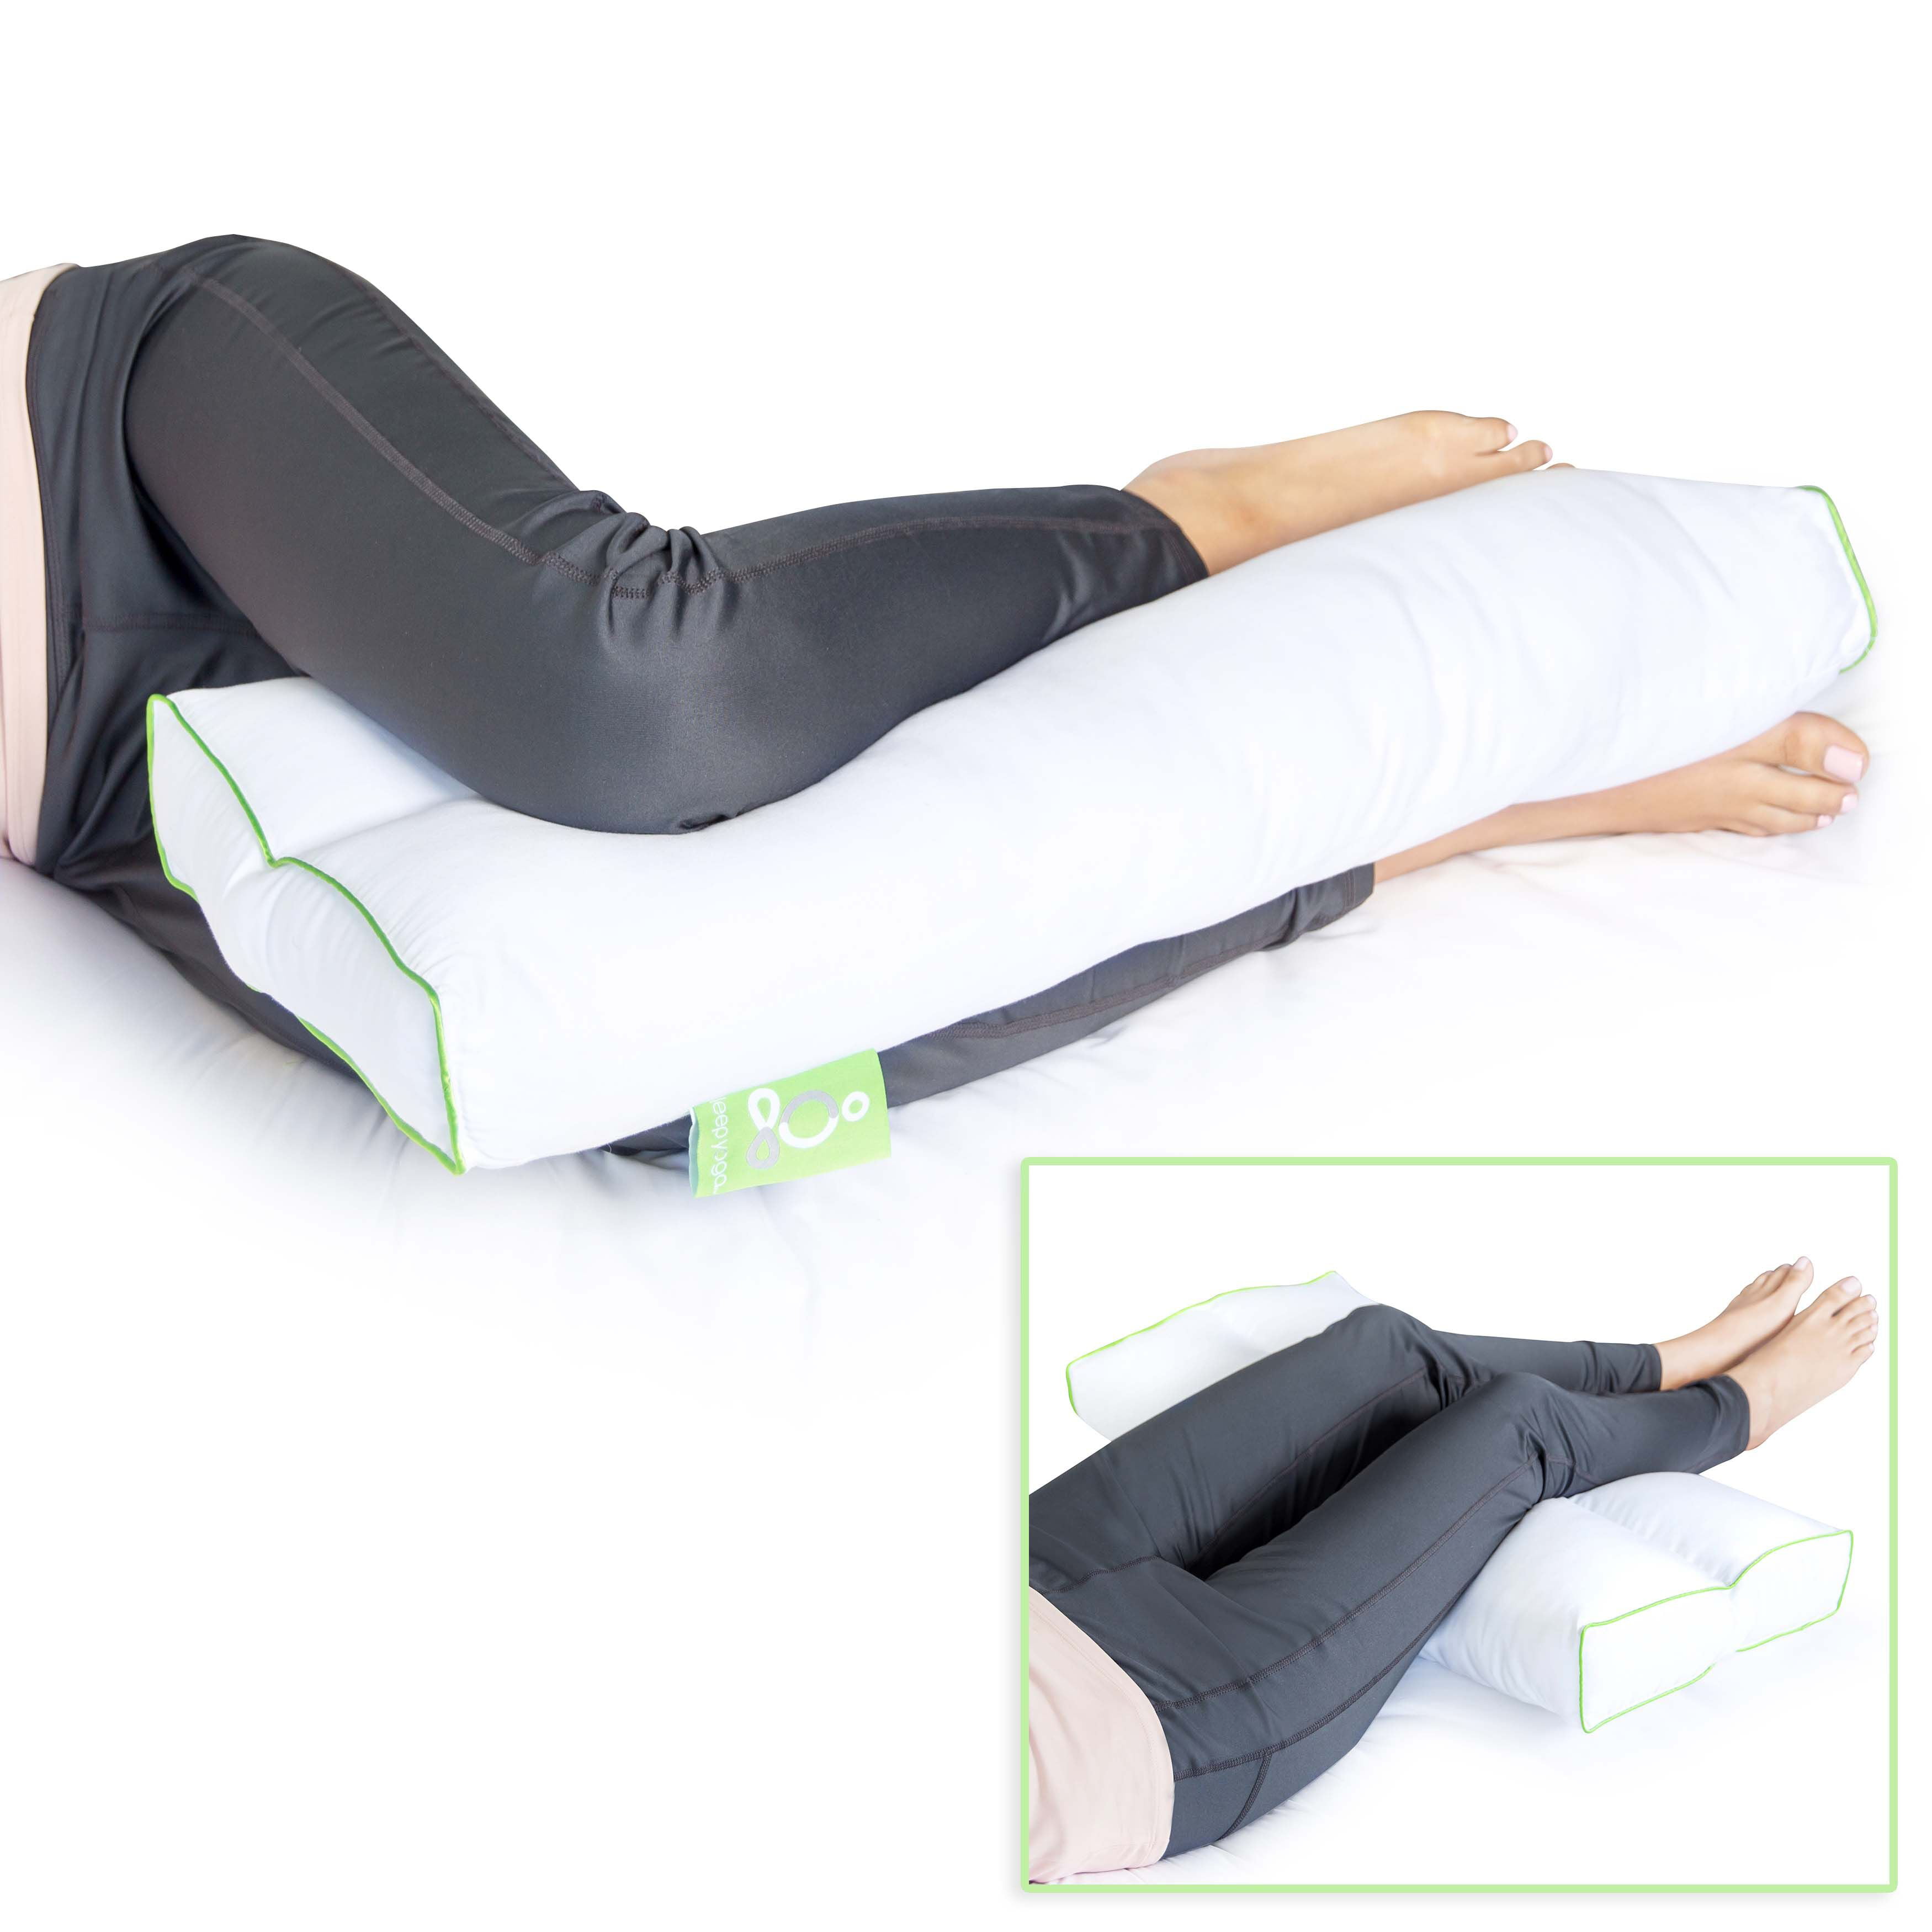 Leg Back Sleepers & Side Sleepers, Ergonomically Designed Down Alternative  Between & Under Pillow for Knee Support, Hypoallergenic & Washable,  26x13x3 One Size, White 